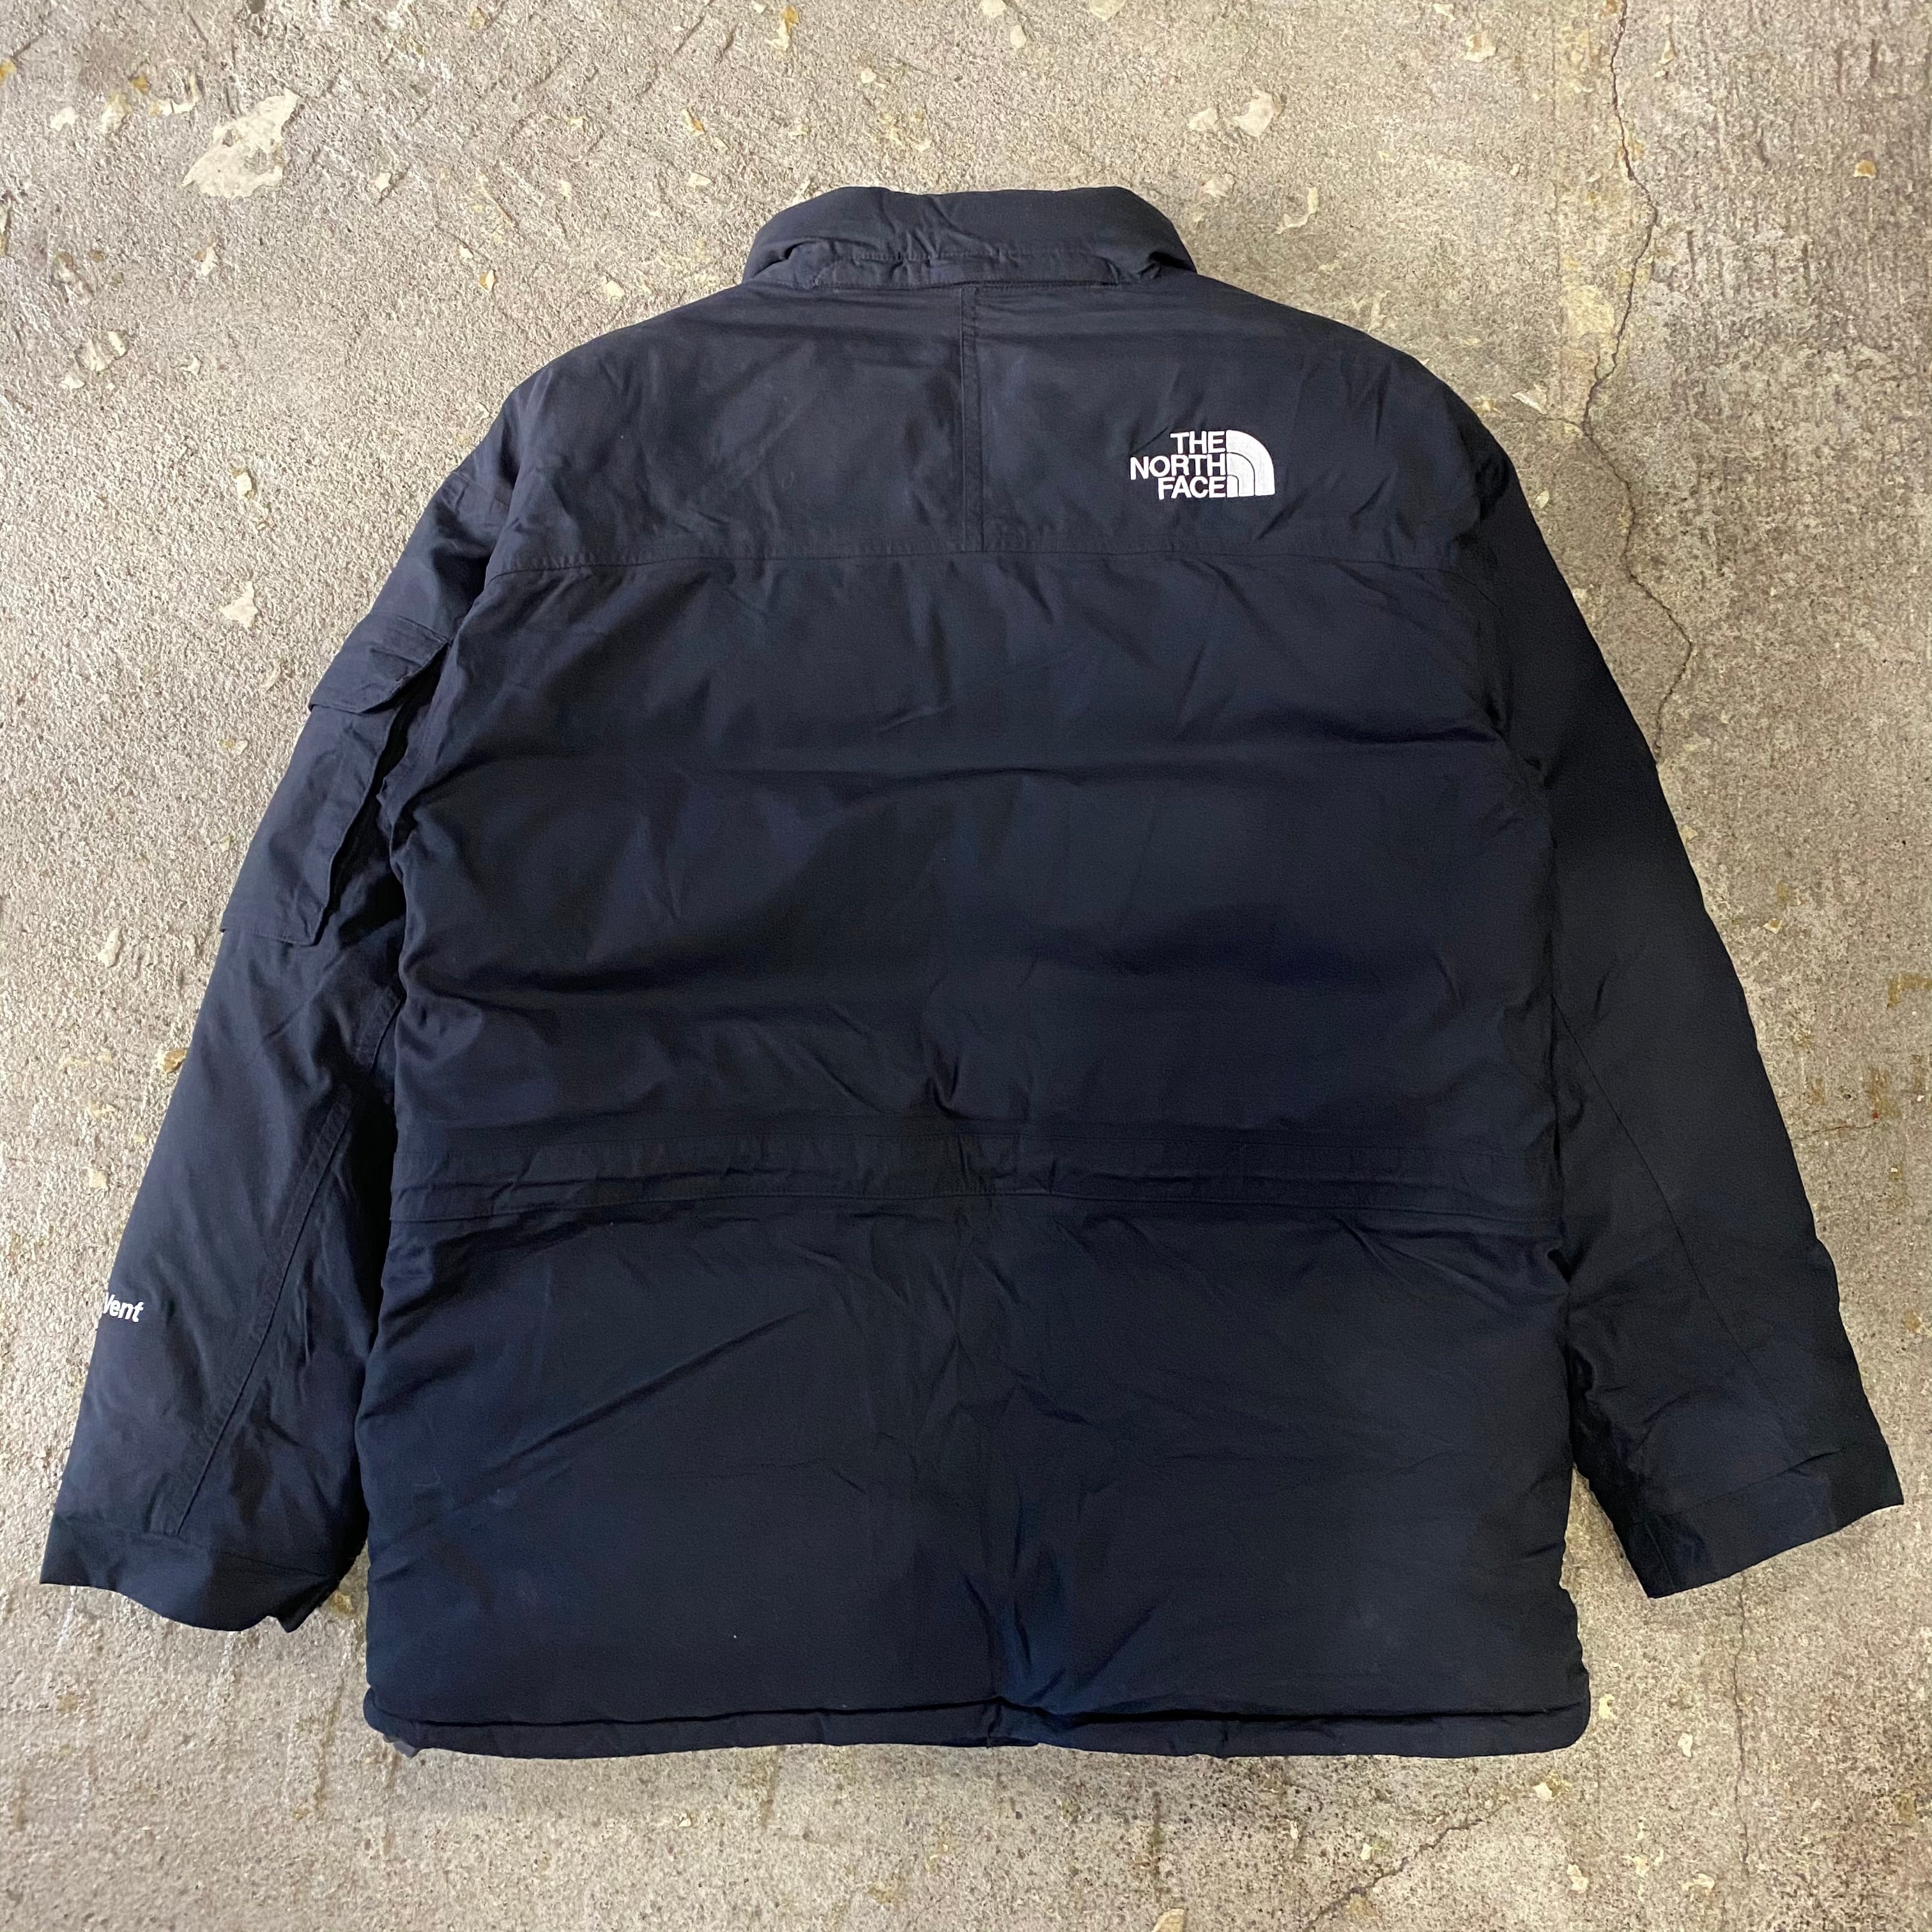 00s The North Face "HyVent" mountain jacket | What'z up